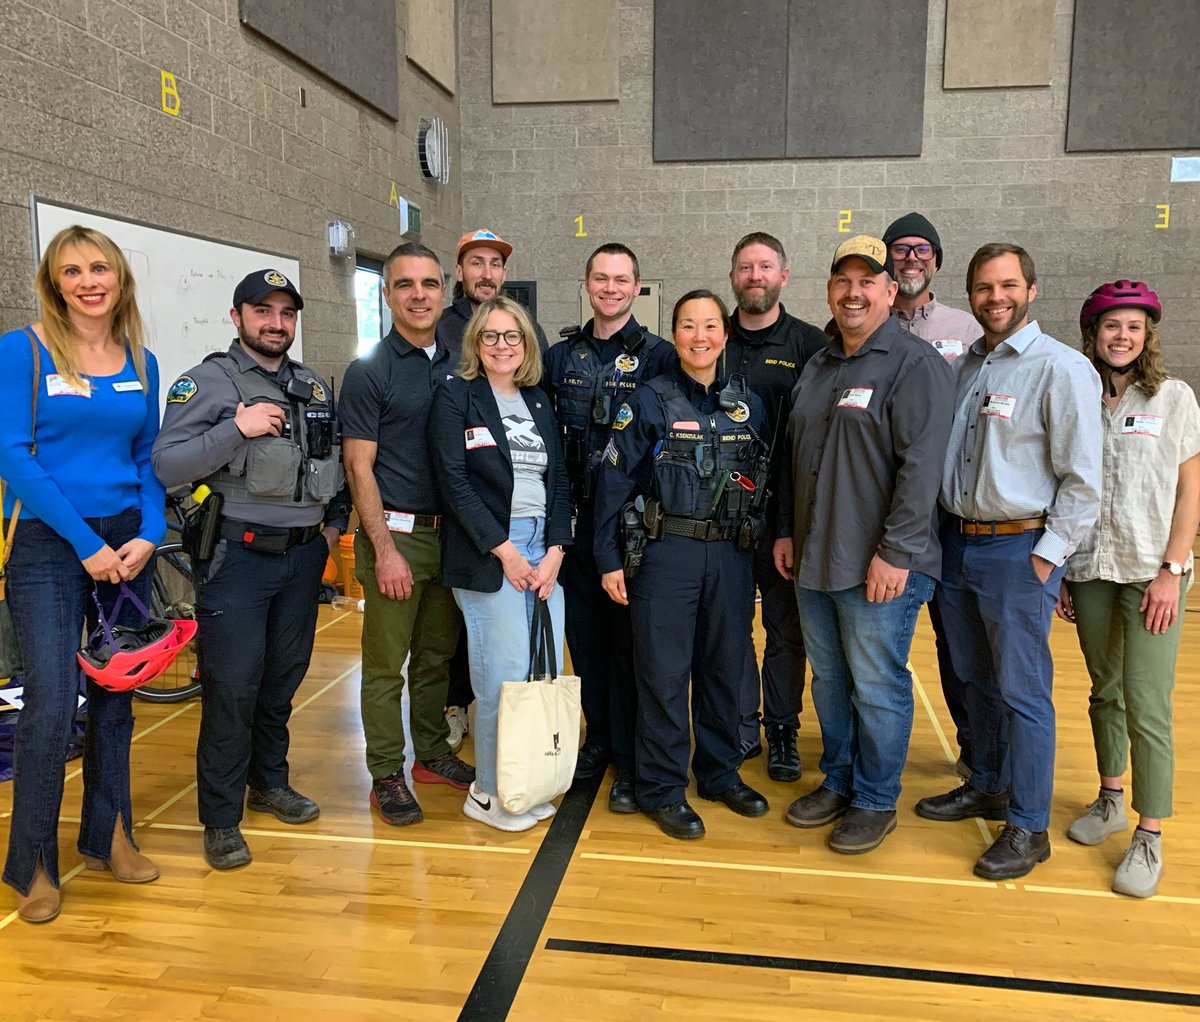 Thank you to the Burger family, Commute Options, Dr. Murphy, and Bend Police Department for talking with PCMS students about e-bike safety and for Rep. Levy’s and Councilor Perkins’ work to get more kids on more bikes safely.